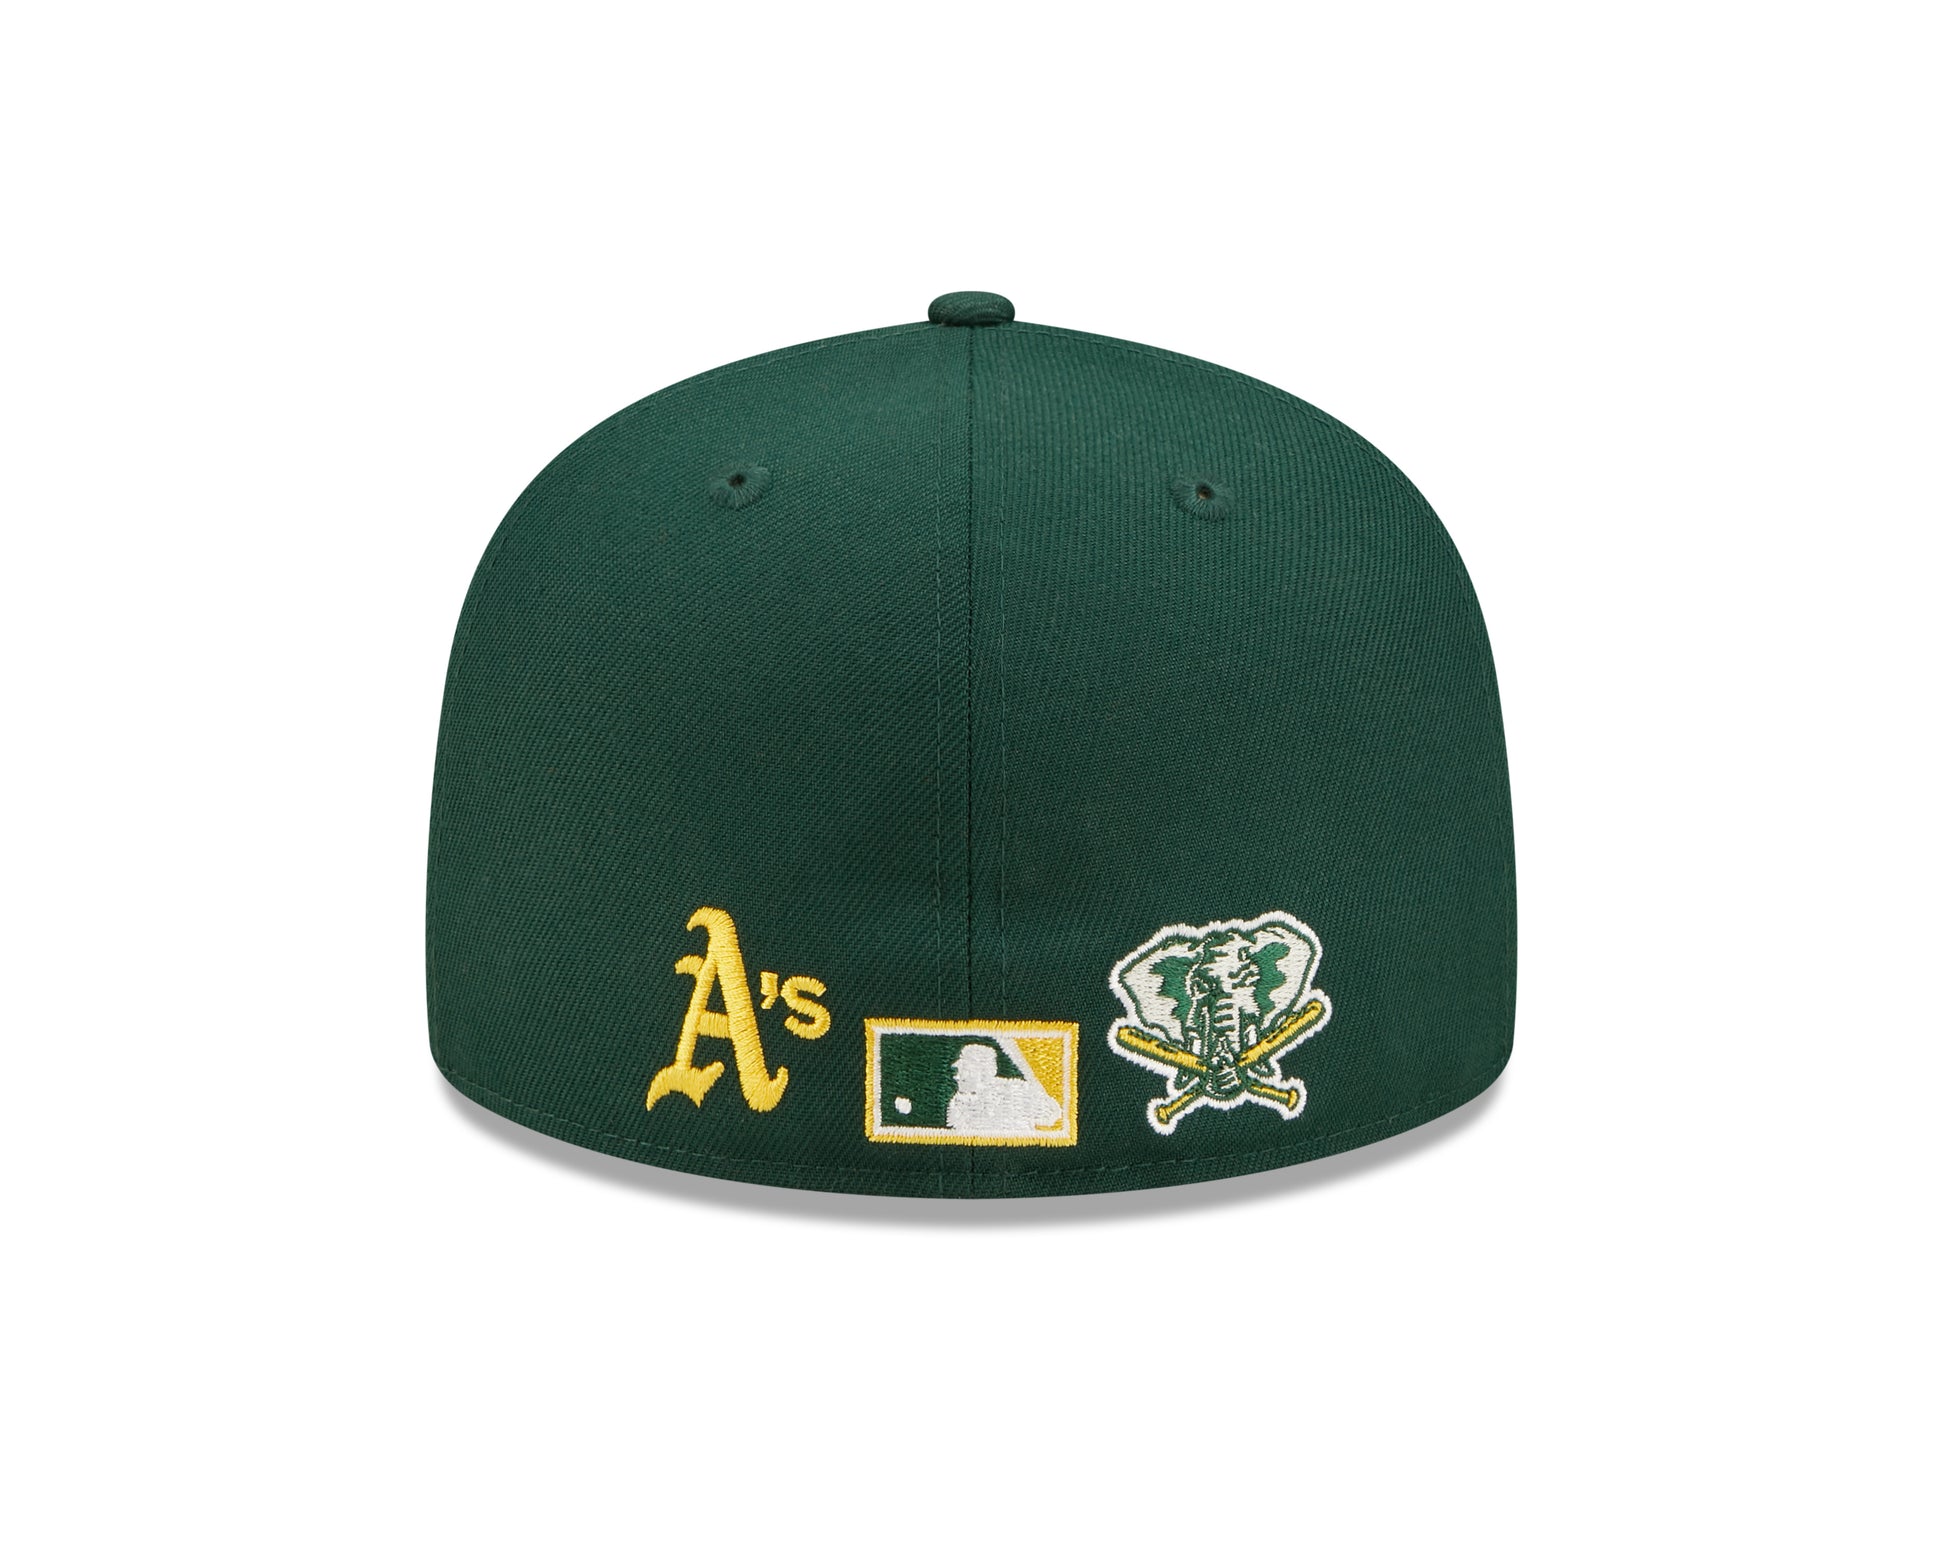 Team Color Split 59fifty Fitted Cap Oakland Athletics - Green - Headz Up 